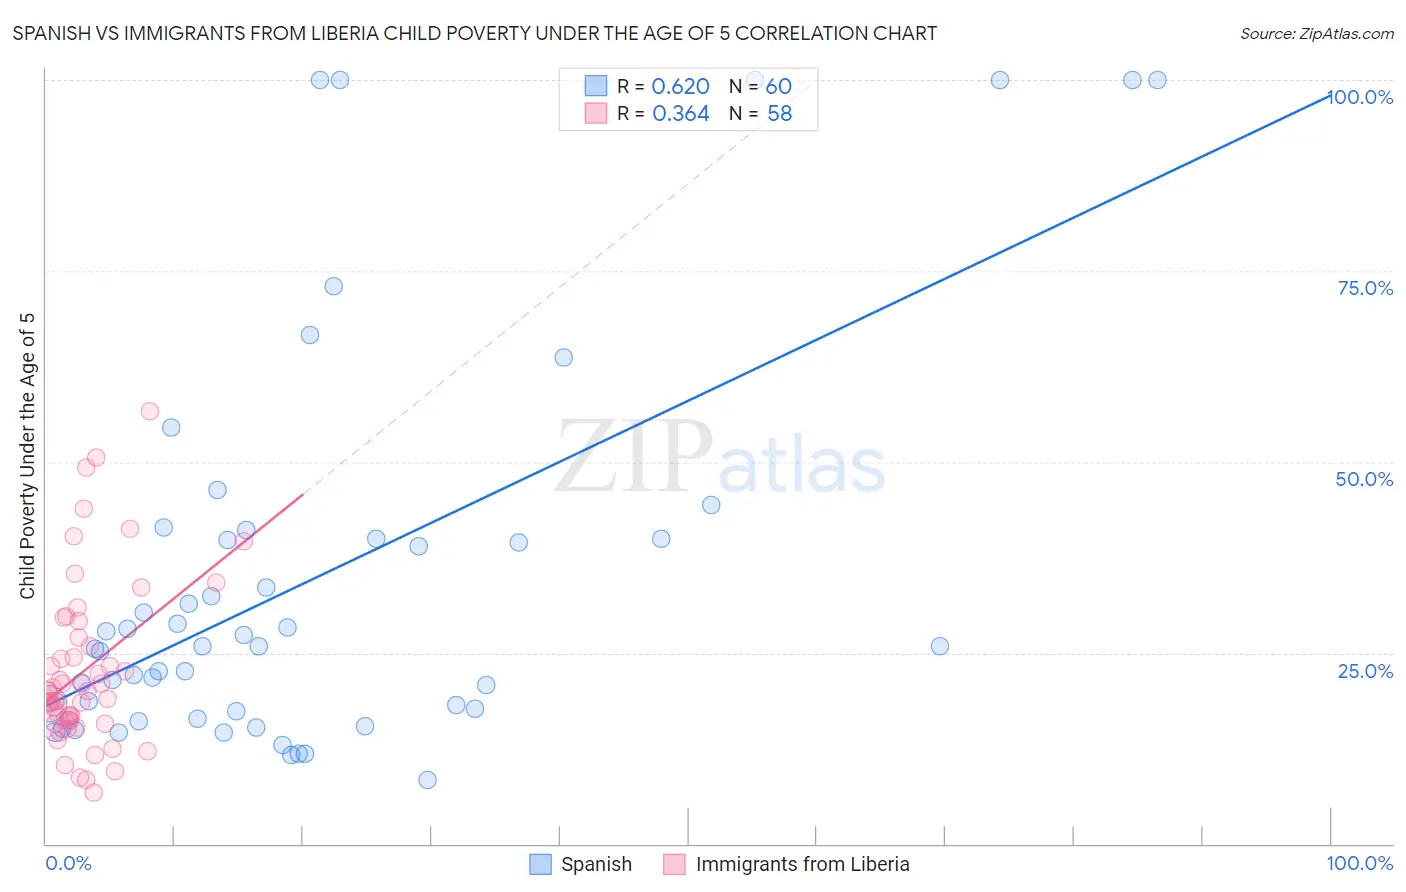 Spanish vs Immigrants from Liberia Child Poverty Under the Age of 5